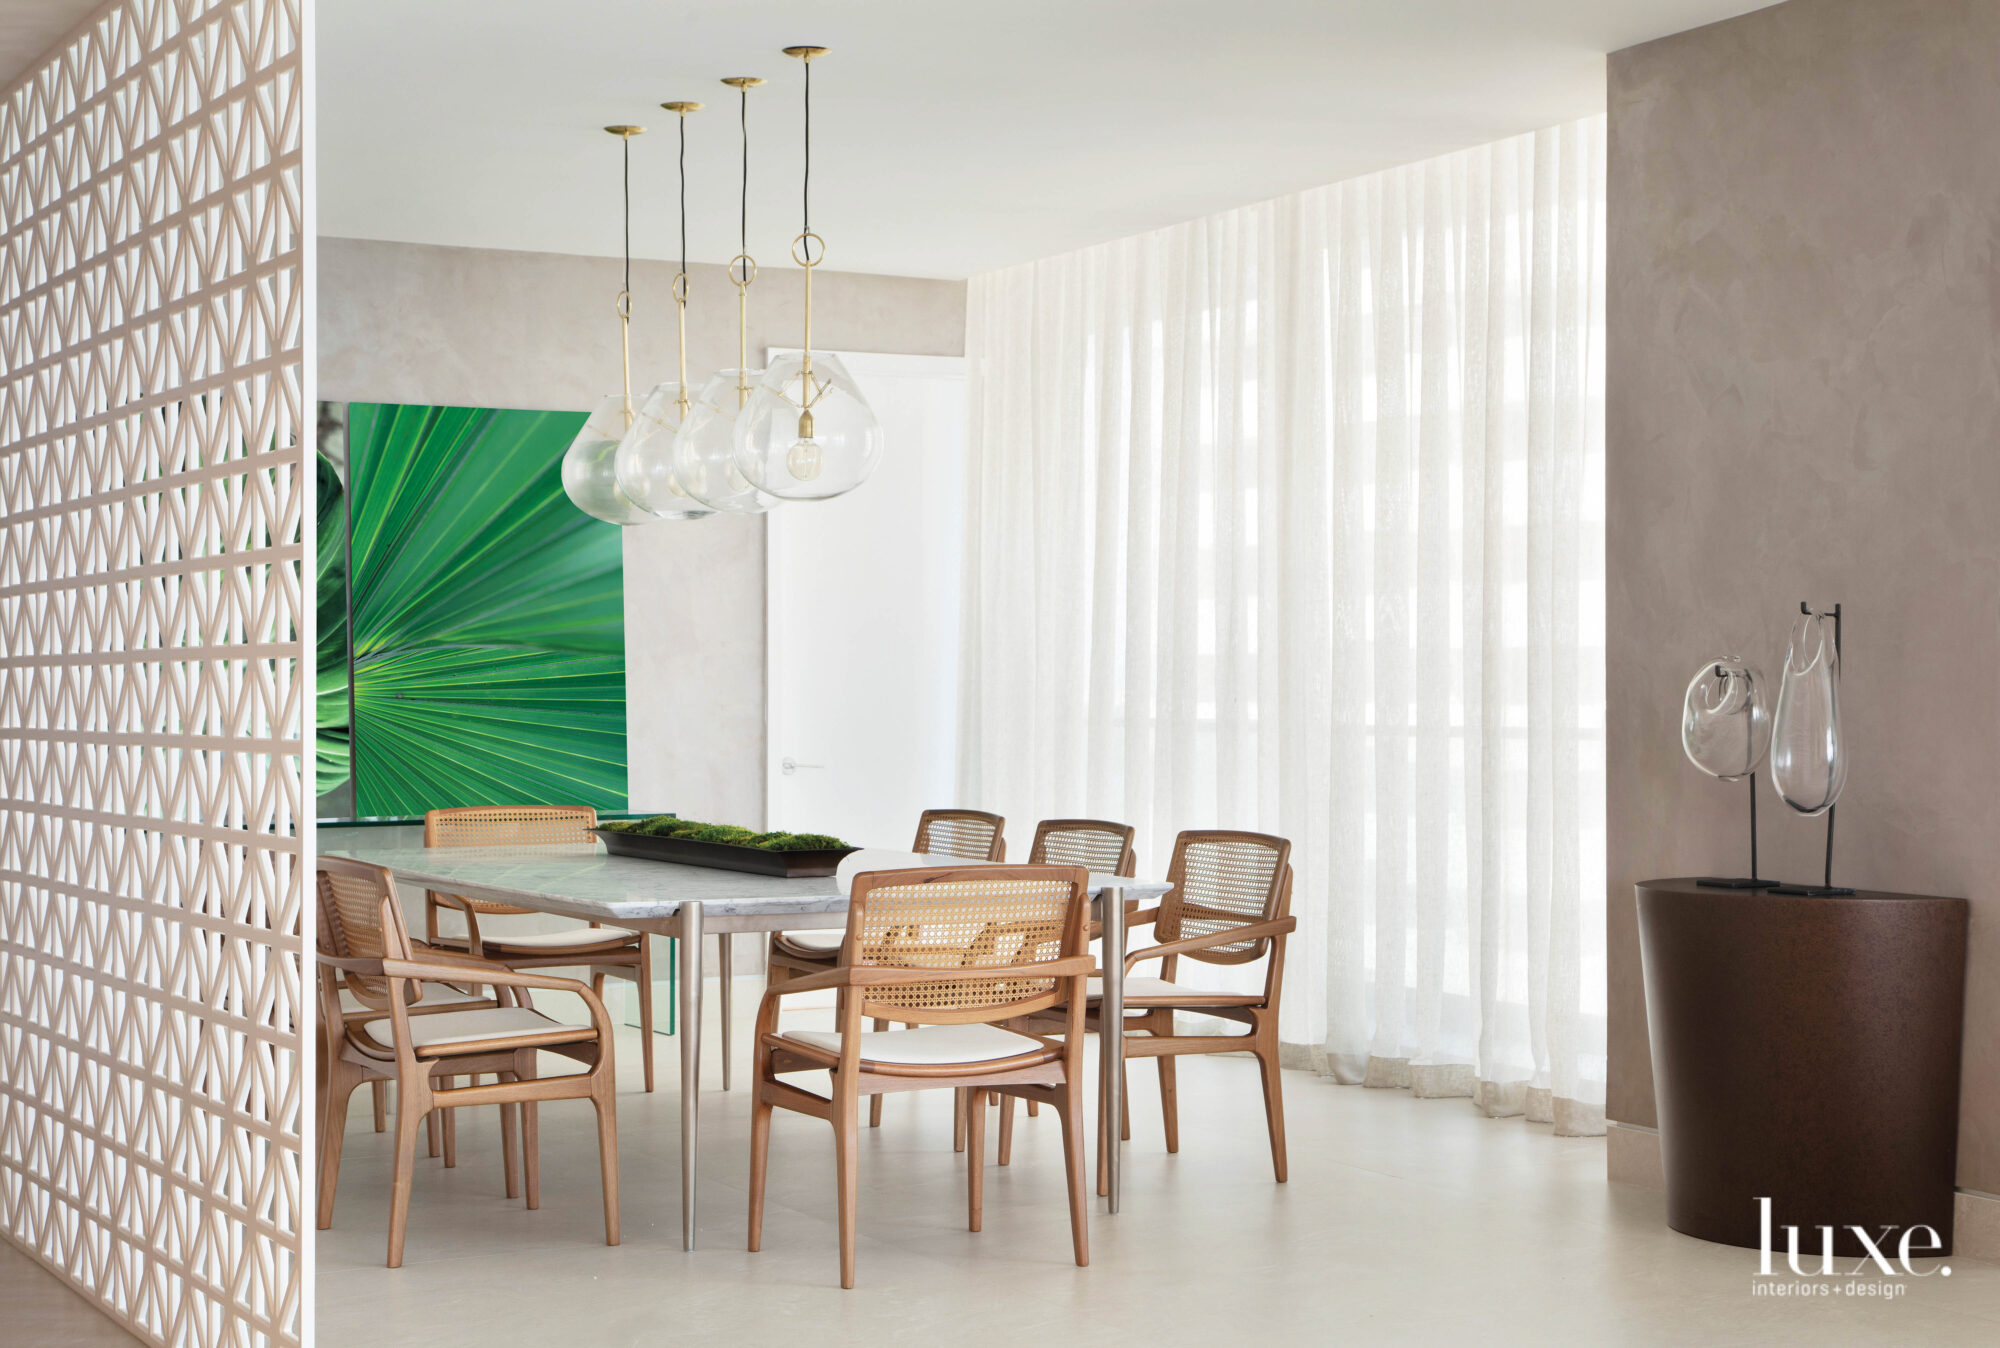 dining area with oak furniture and tropical artwork